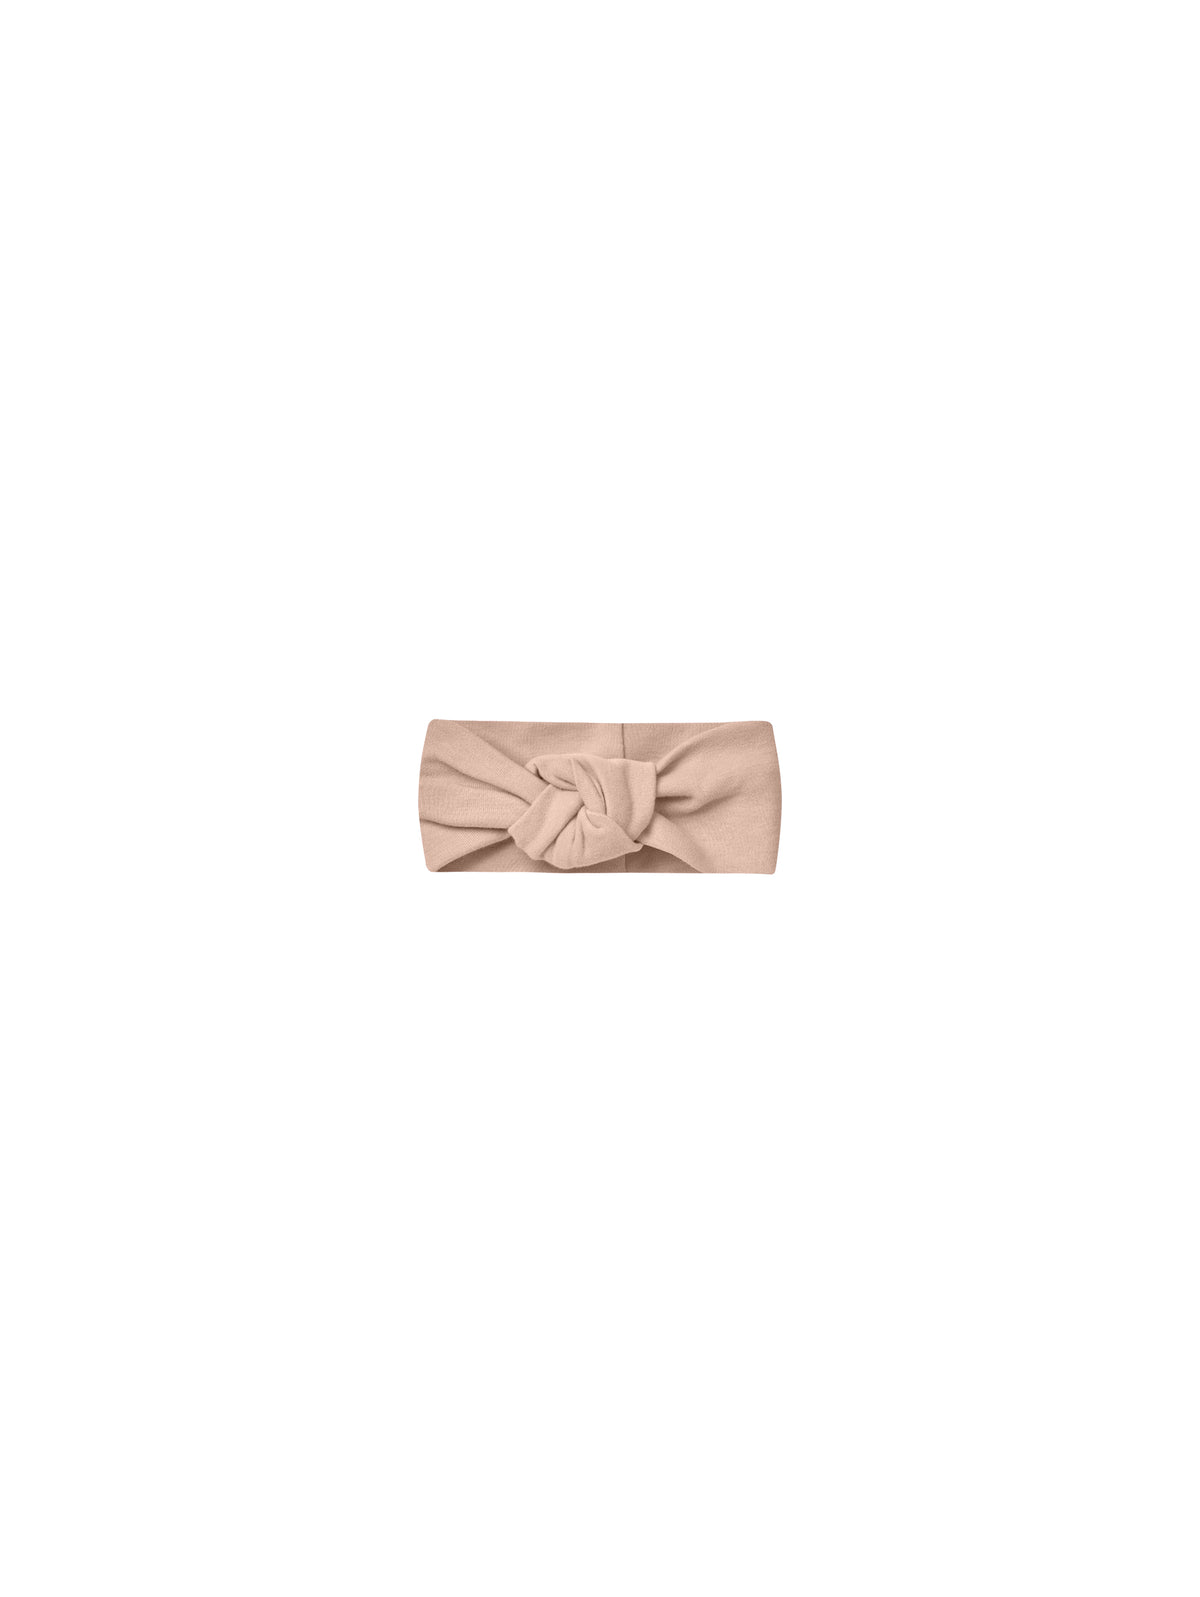 Quincy Mae | Knotted Headband || Blush